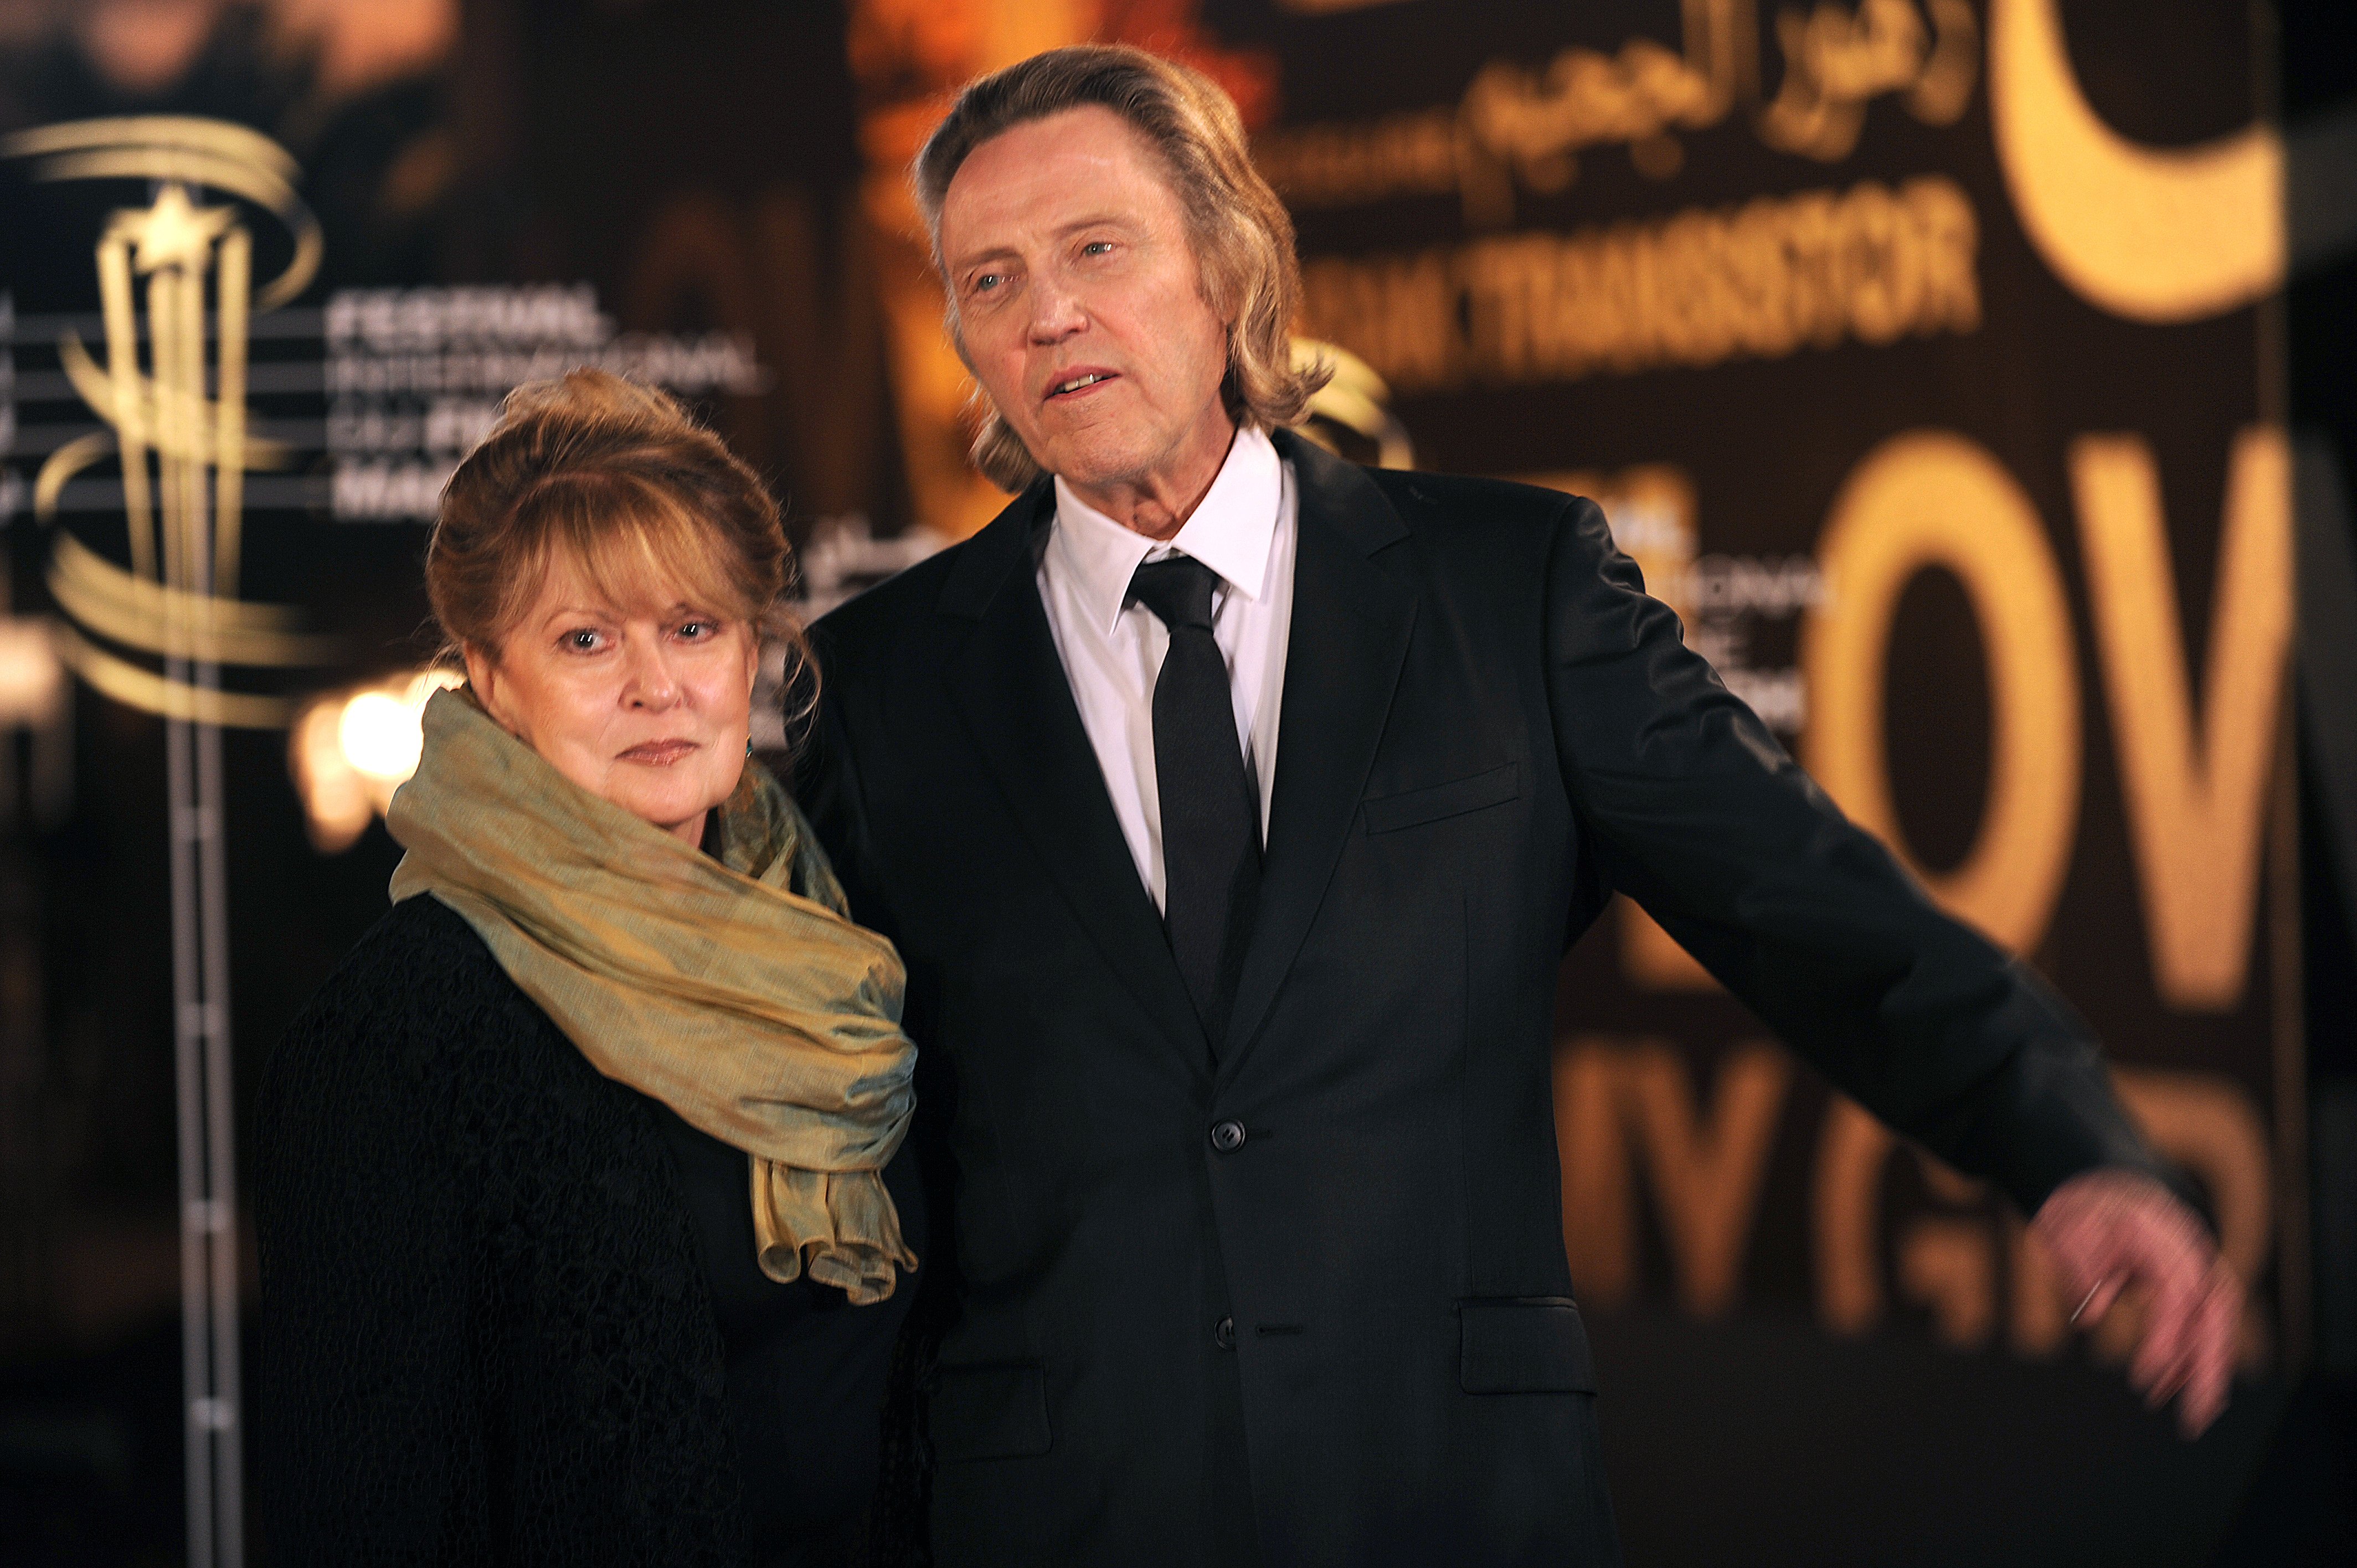 Christopher Walken and his wife Georgianne Walken attend the 9th edition of the Marrakech International Film Festival where he received a tribute for his career on December 5, 2009, in Morrocco. | Source: Getty Images